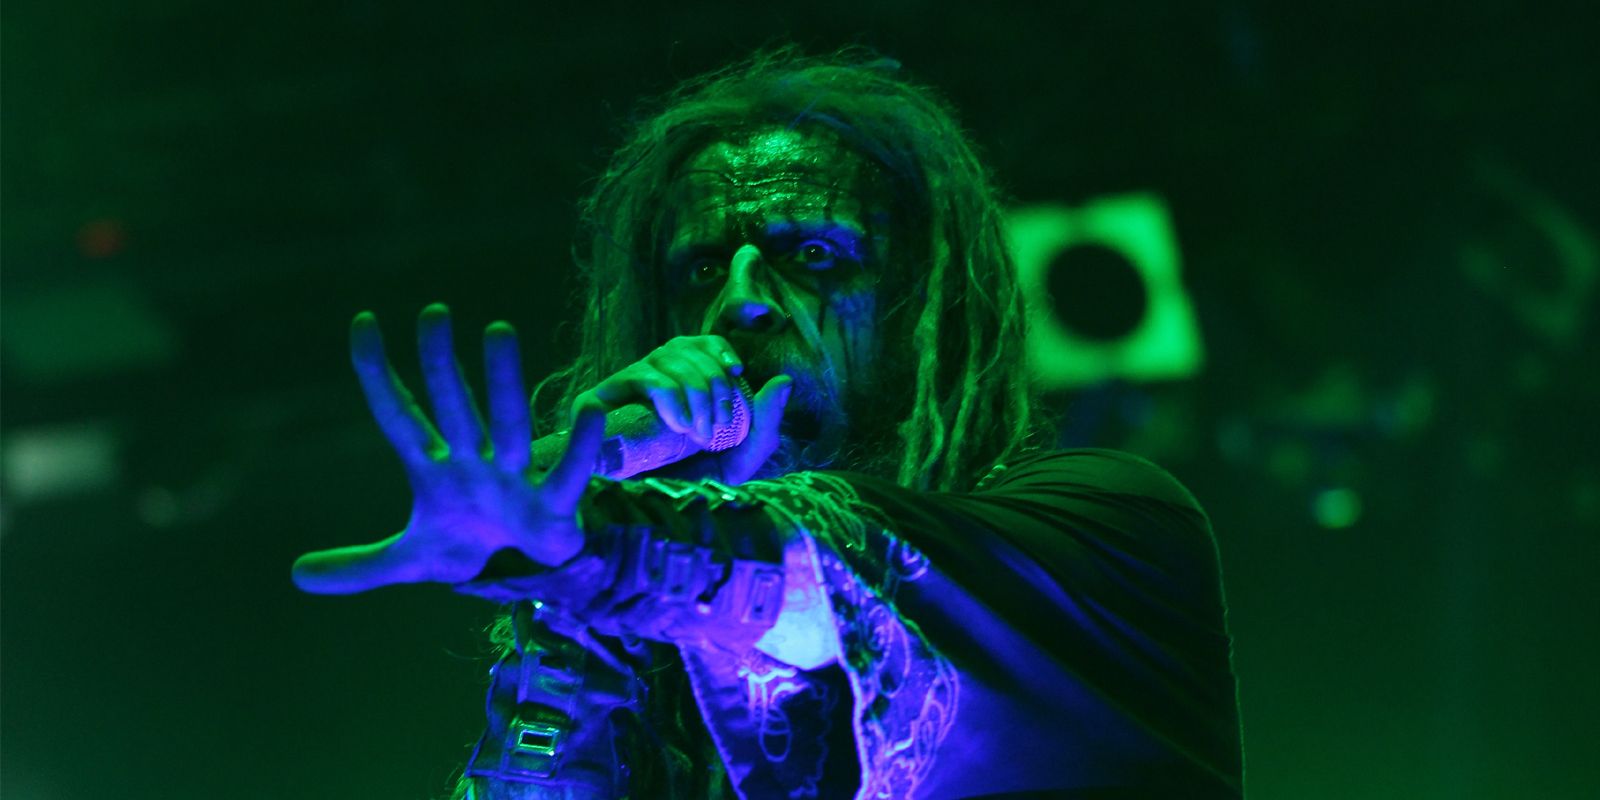 Rob Zombie at the With Full Force festival 2014